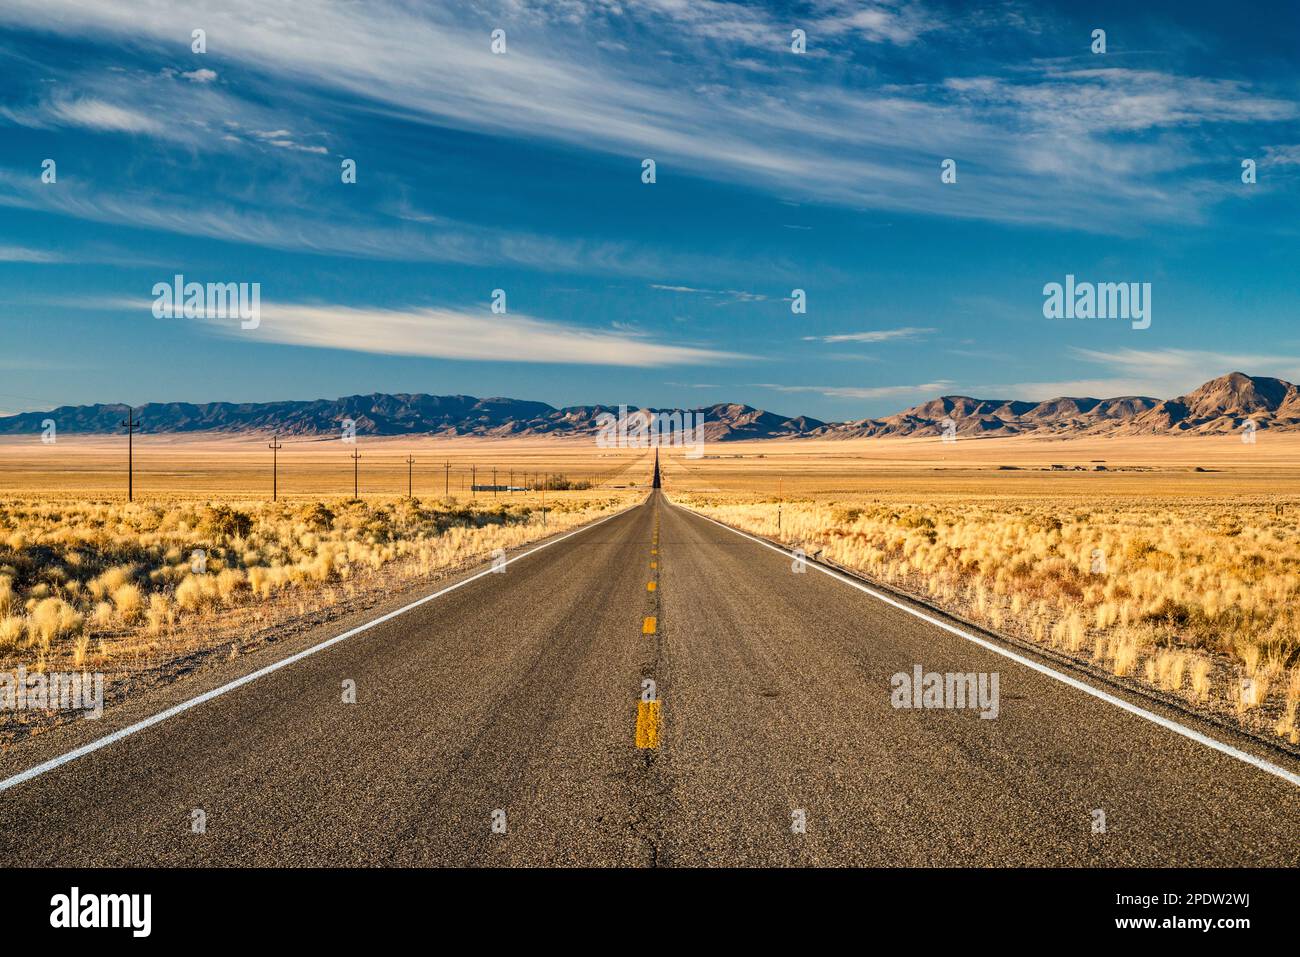 15 miles long straight line of Grand Army of the Republic Highway (US 6), Hot Creek Range in distance, Great Basin Desert, east of Tonopah, Nevada USA Stock Photo